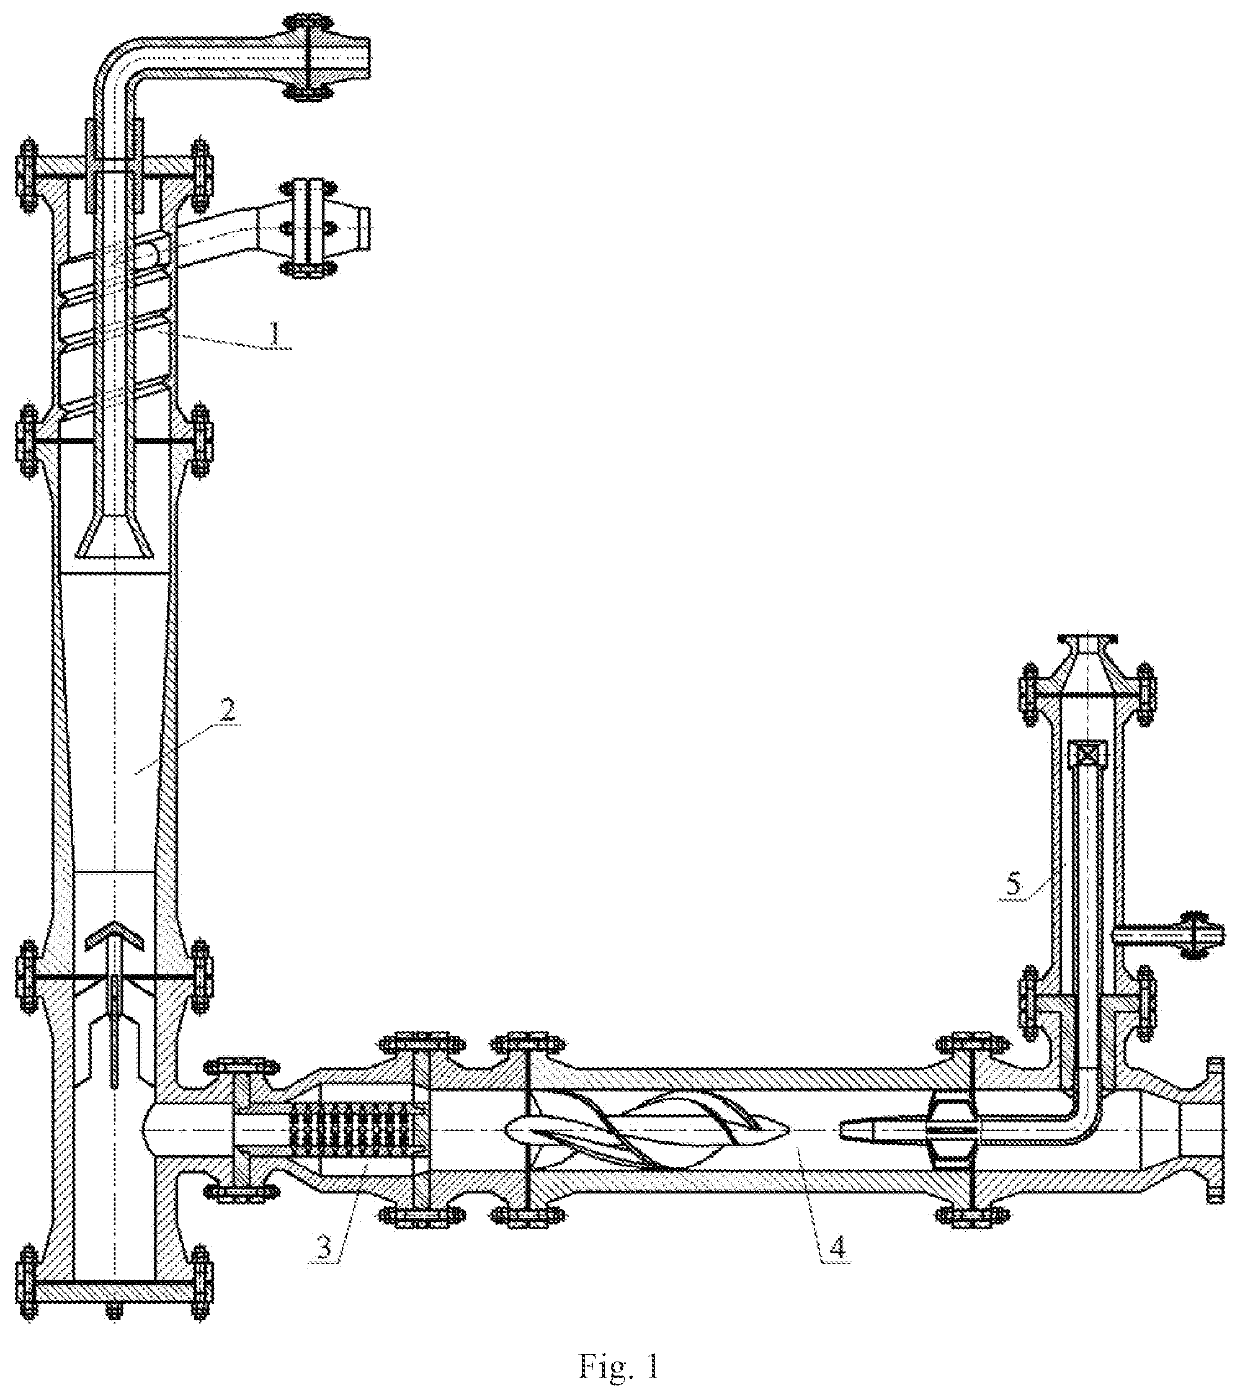 Compact l-shaped cylinder-cone combined tubular three-stage axial flow degassing device